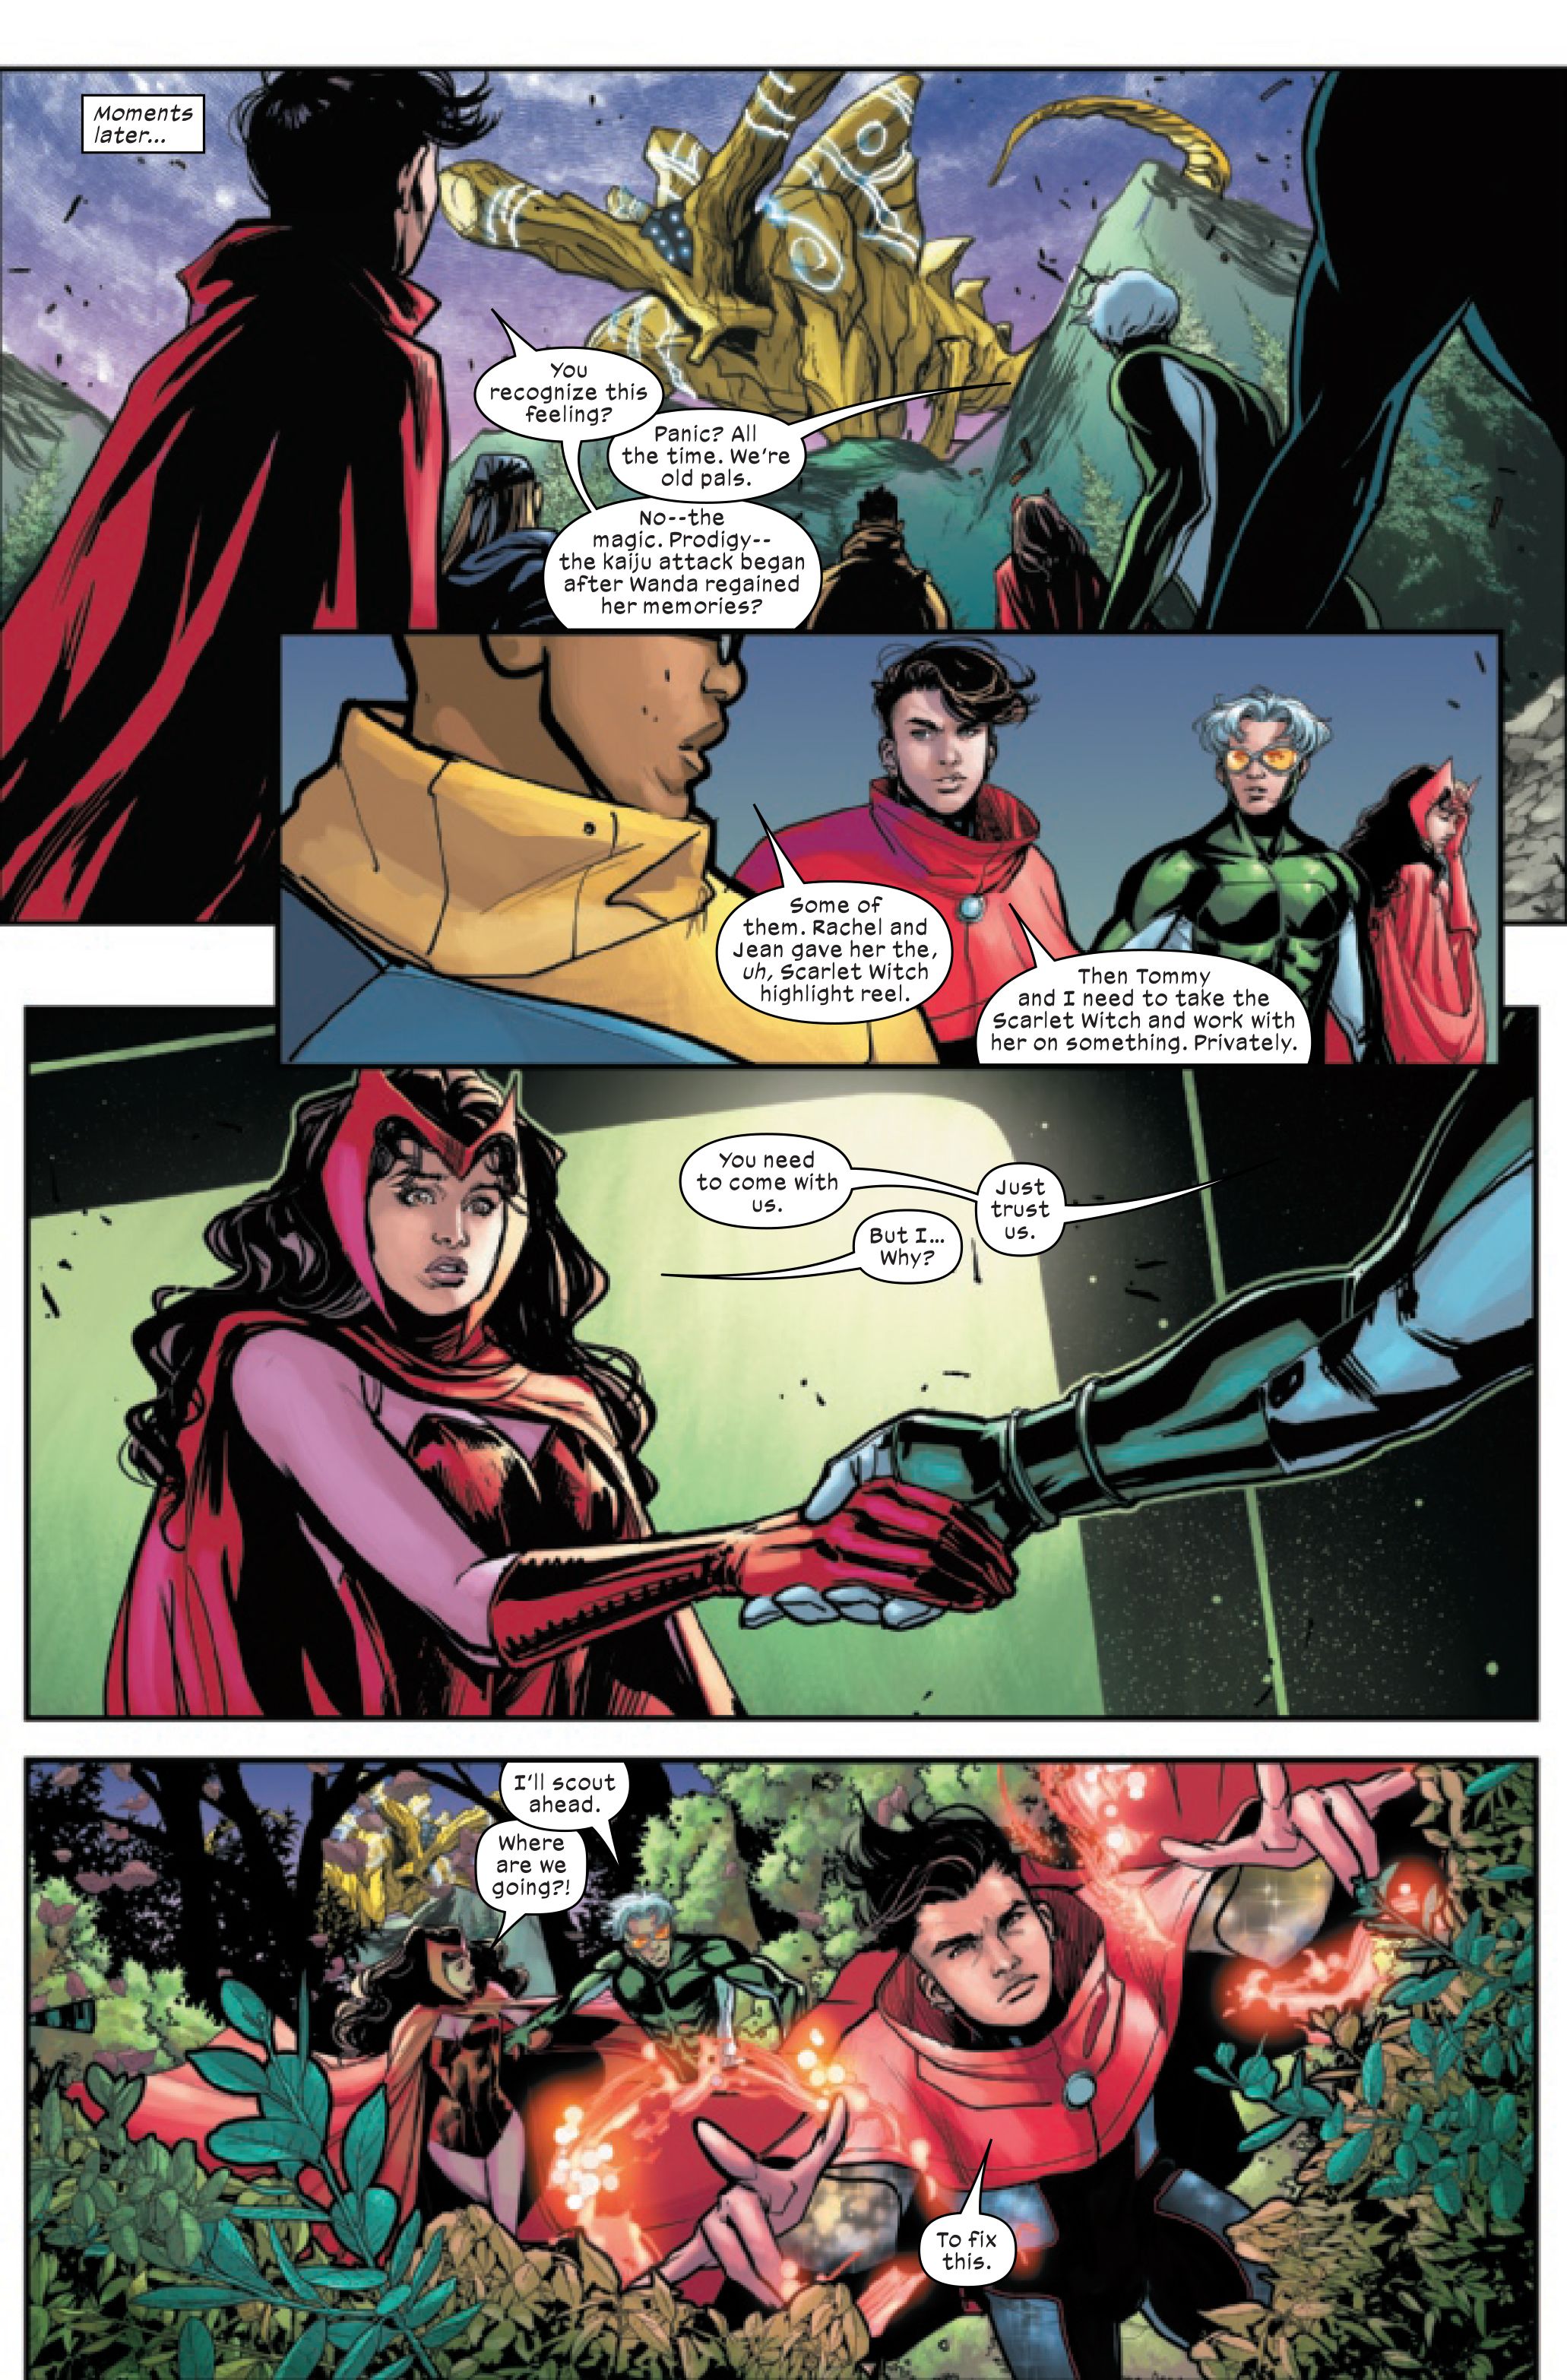 Page 1 of X-Men: The Trial of Magneto #4, by Leah Williams and Lucas Werneck.